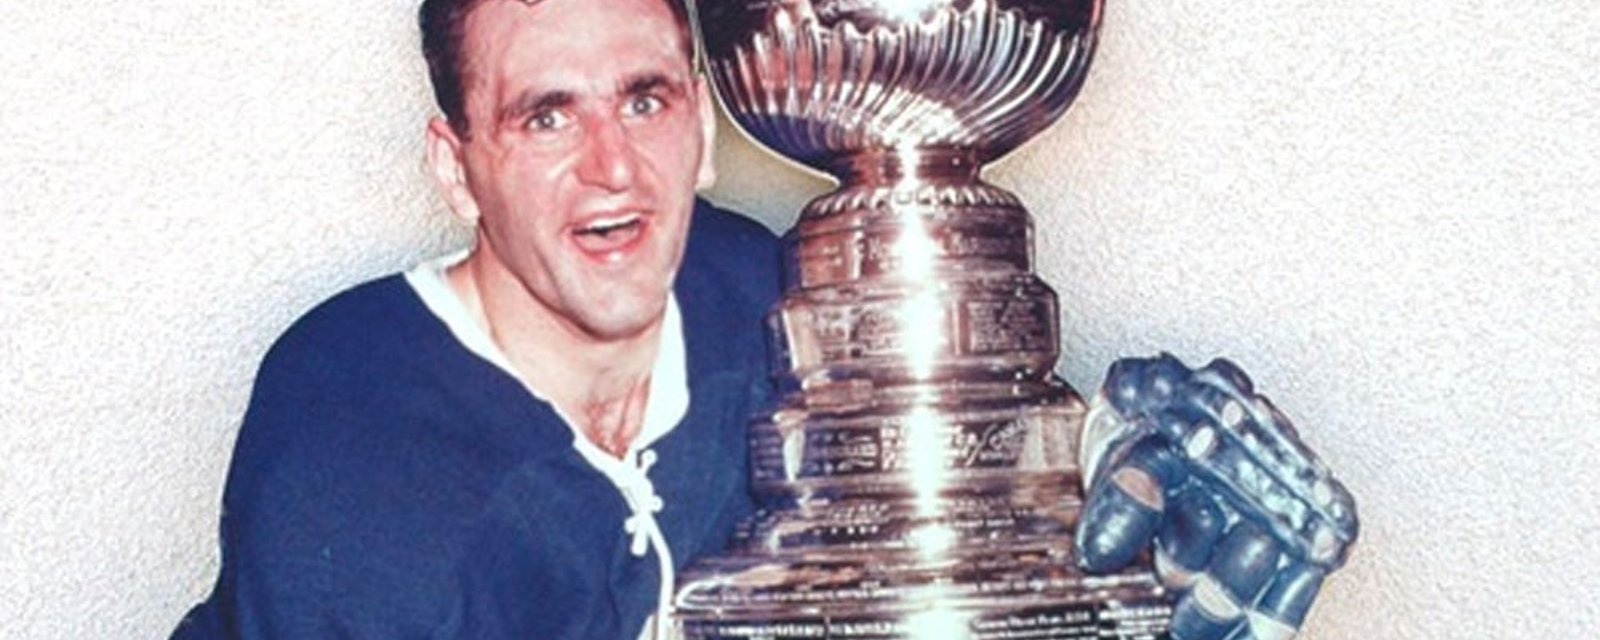 Leafs legend Bobby Baun passes away at 86 years old